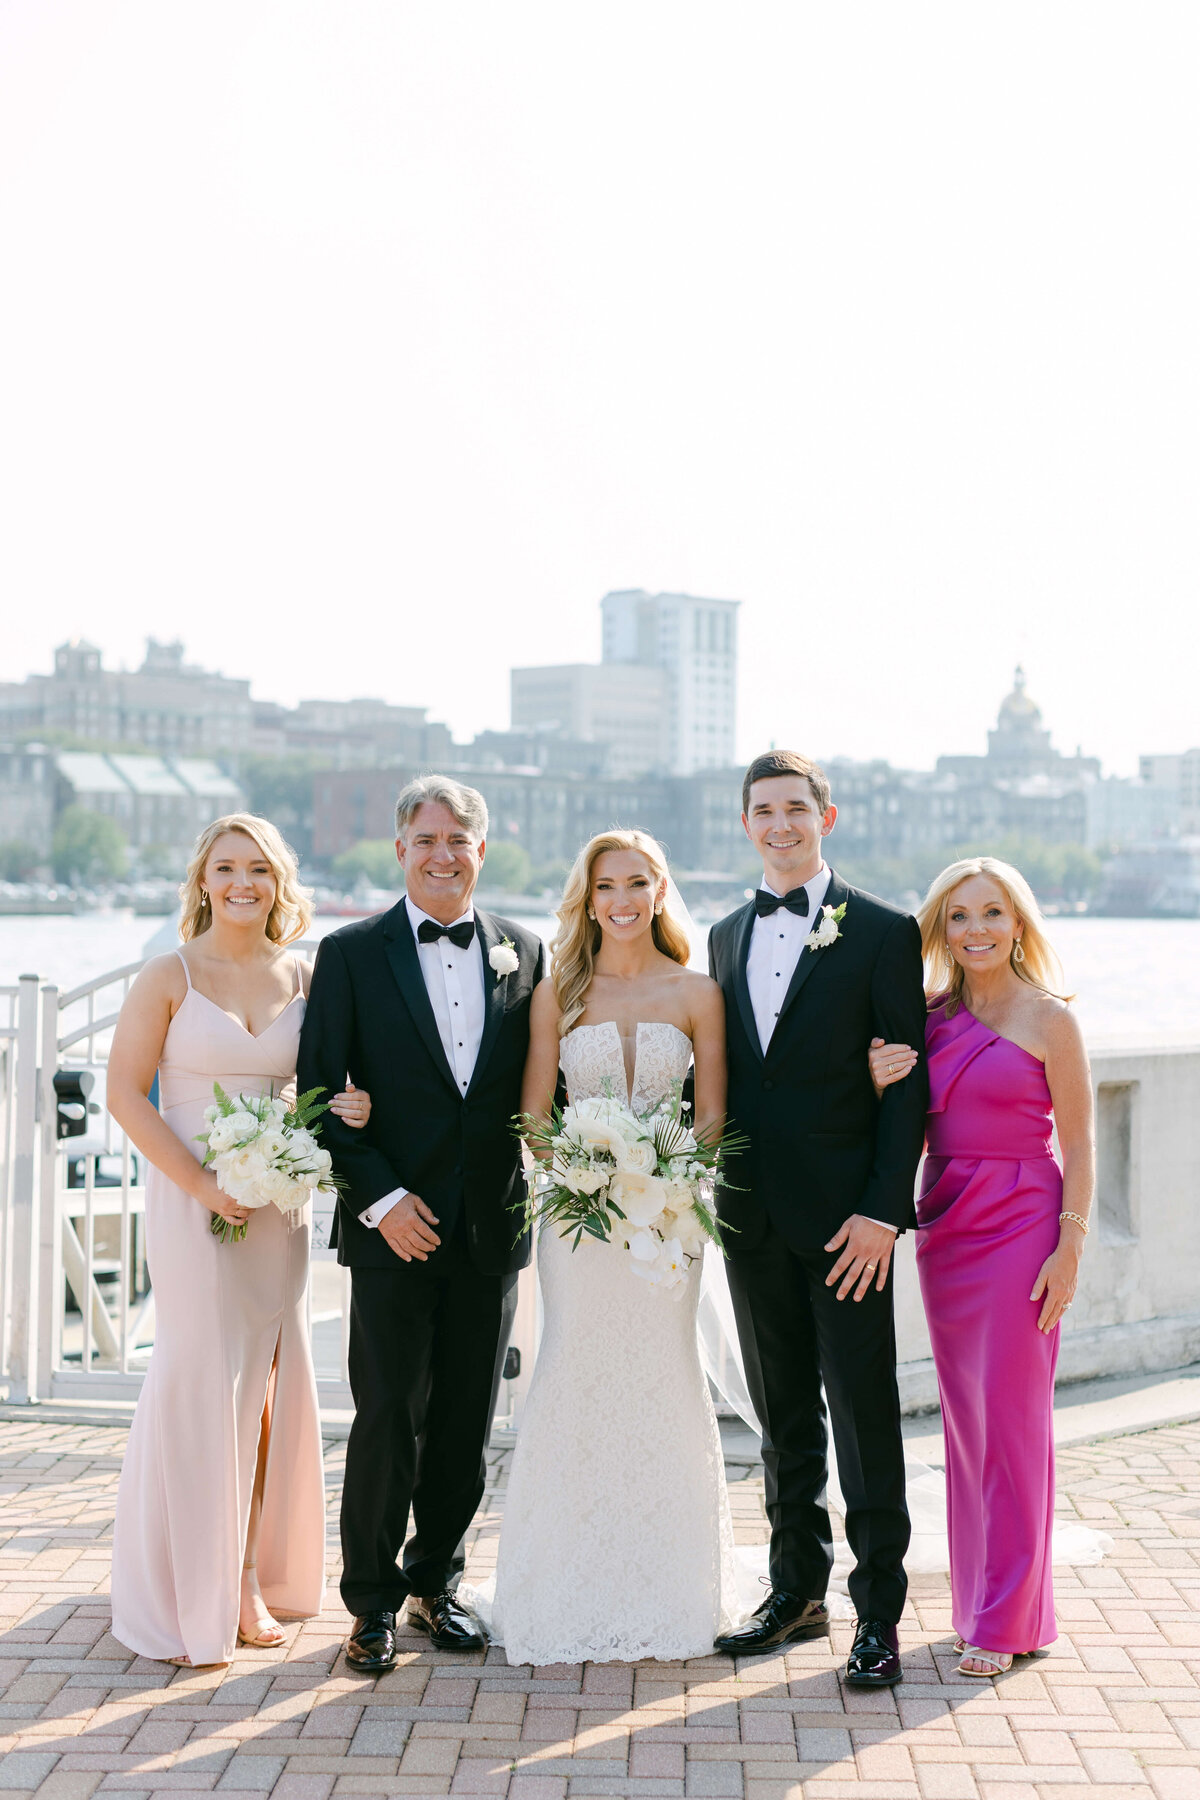 A bride and groom stand with their family.